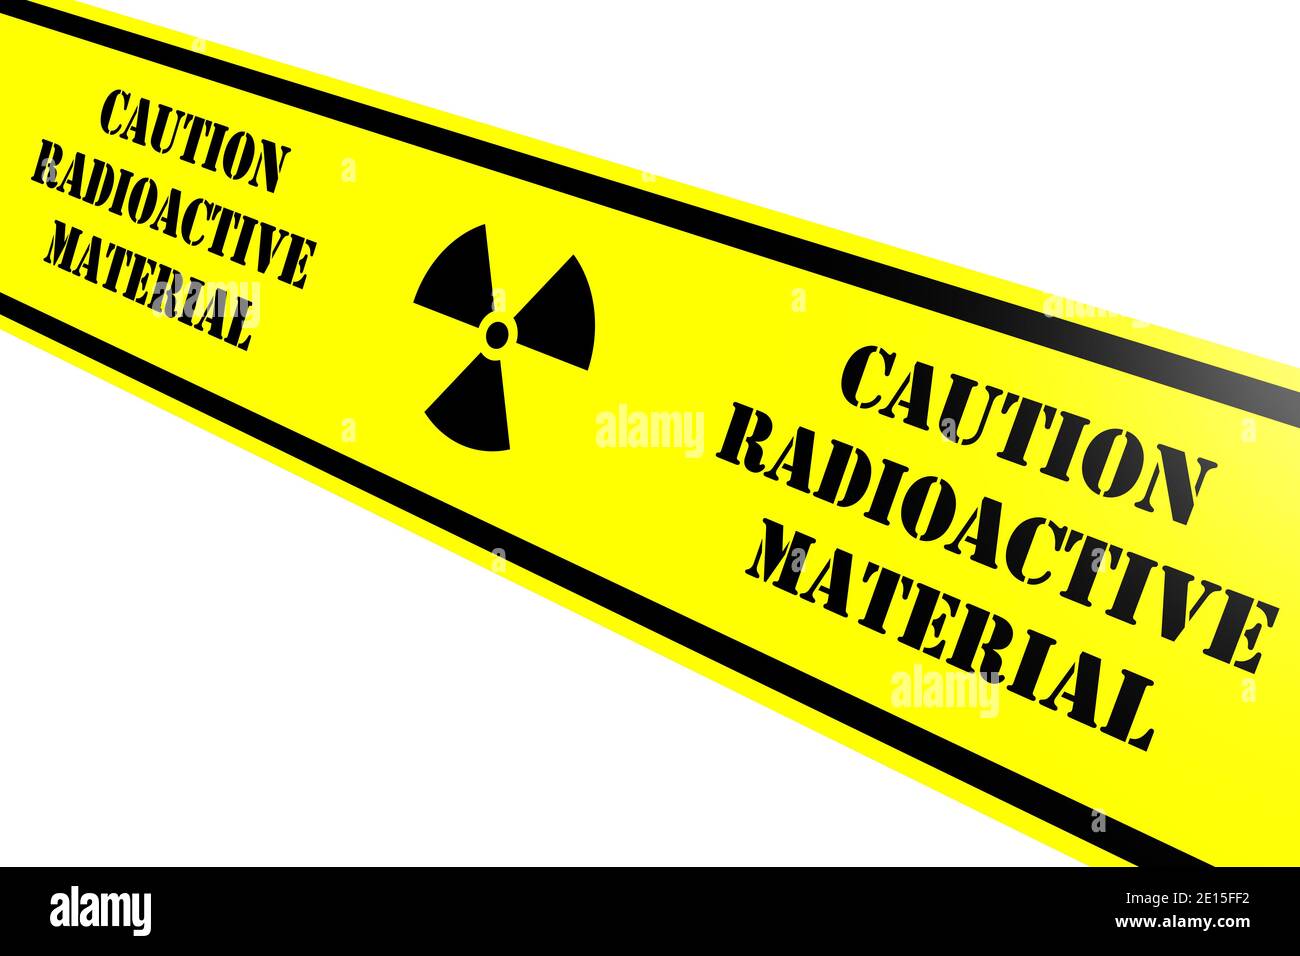 Radioactive material. Yellow warning tape with black text CAUTION. RADIOACTIVE MATERIAL. Isolated. 3D Illustration Stock Photo